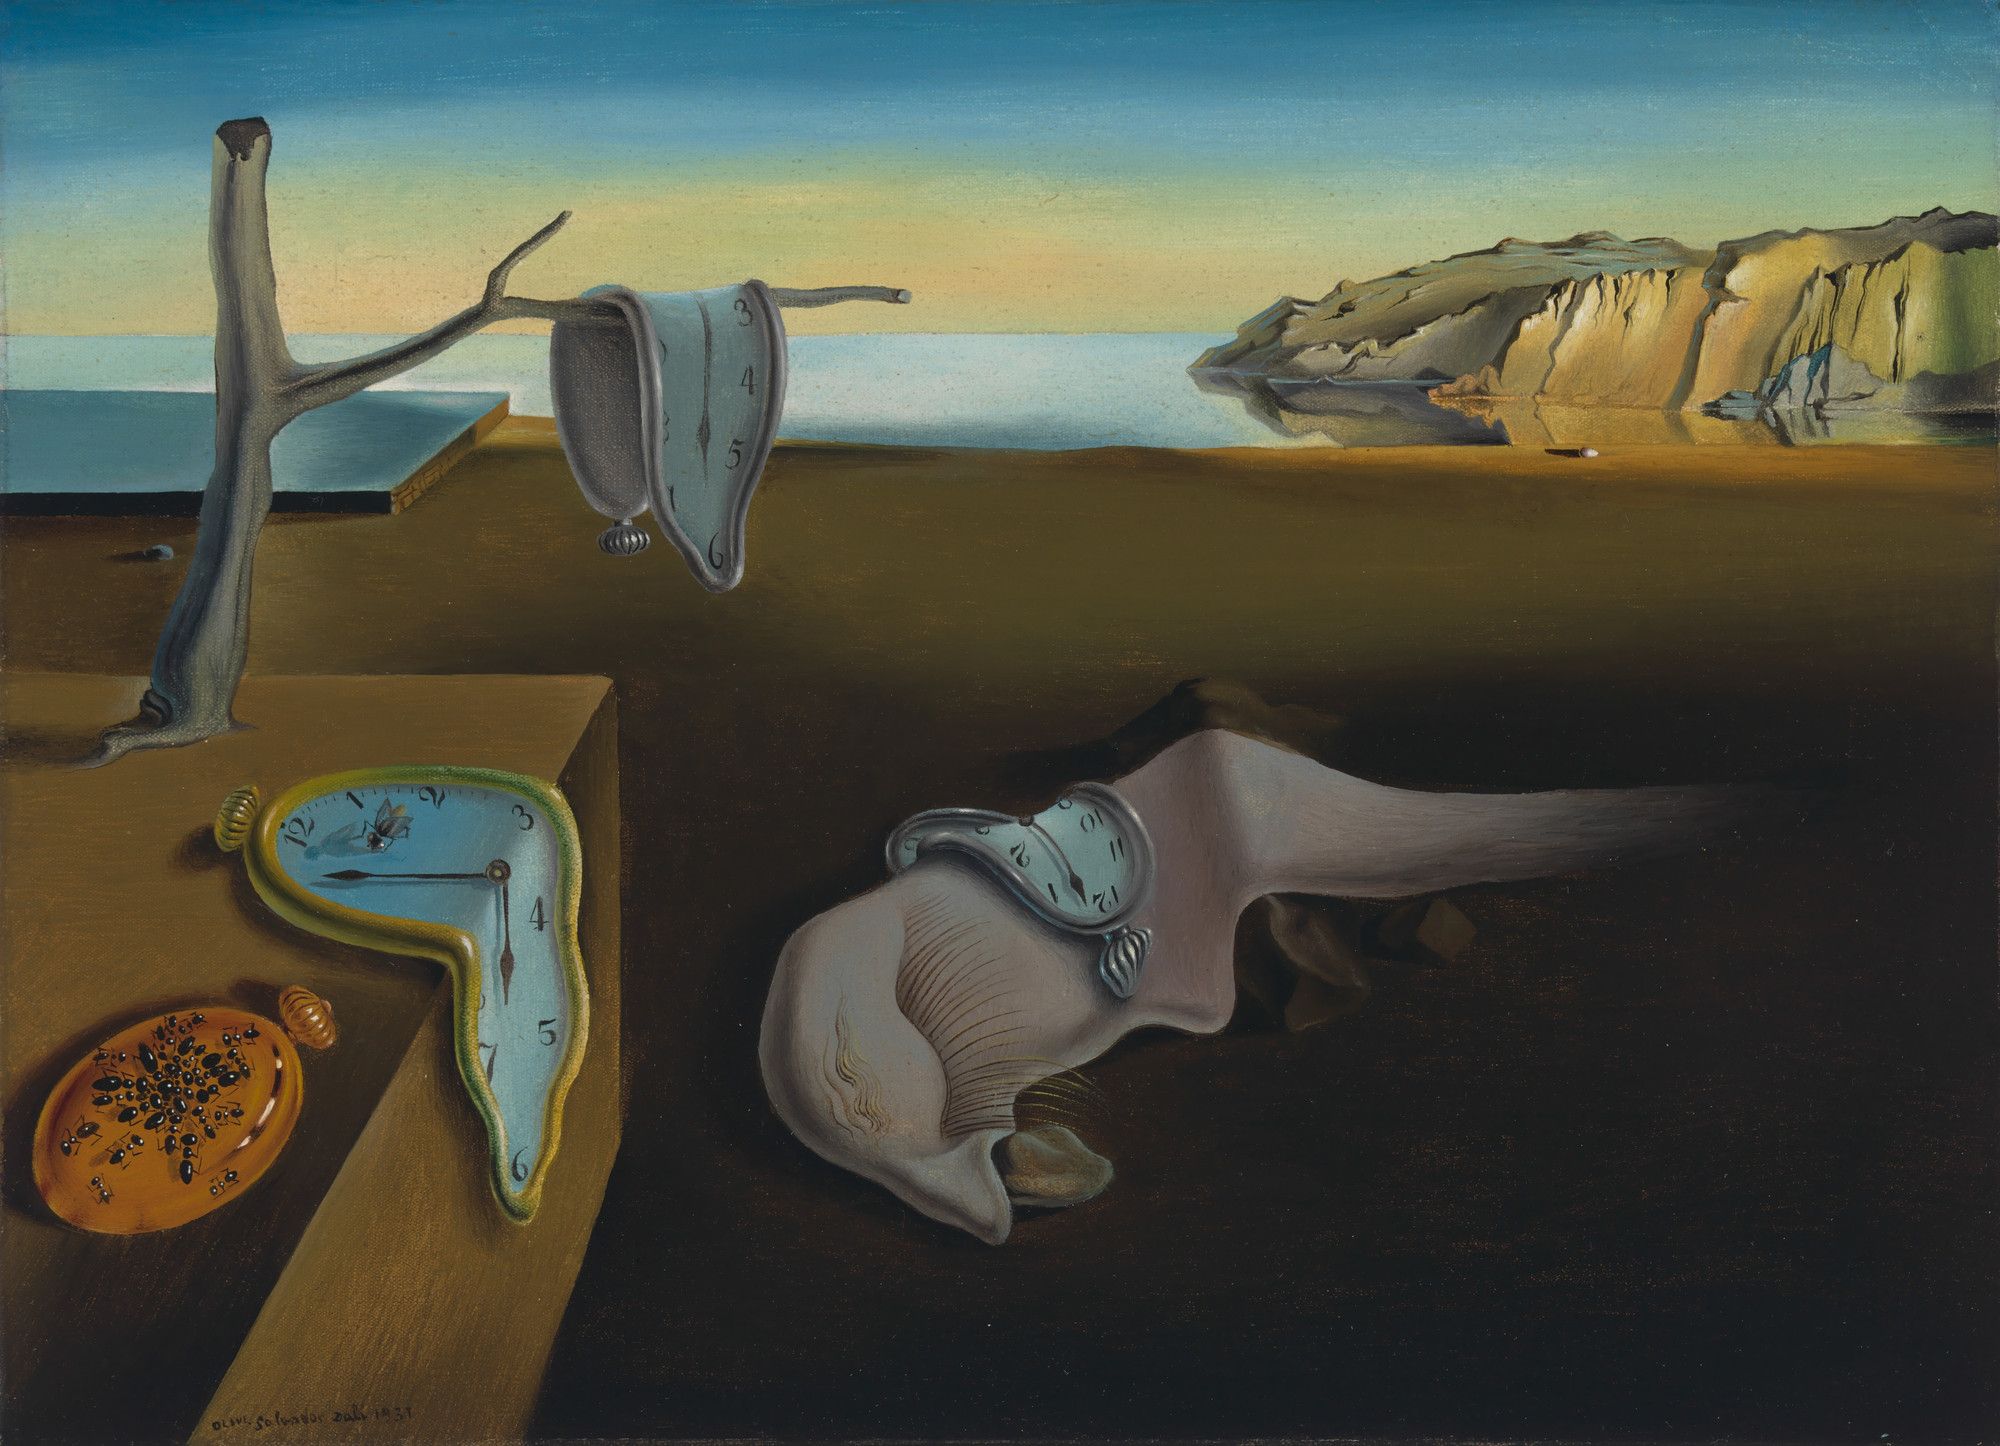 Salvador Dali's 1931 painting titled The Persistence of Memory